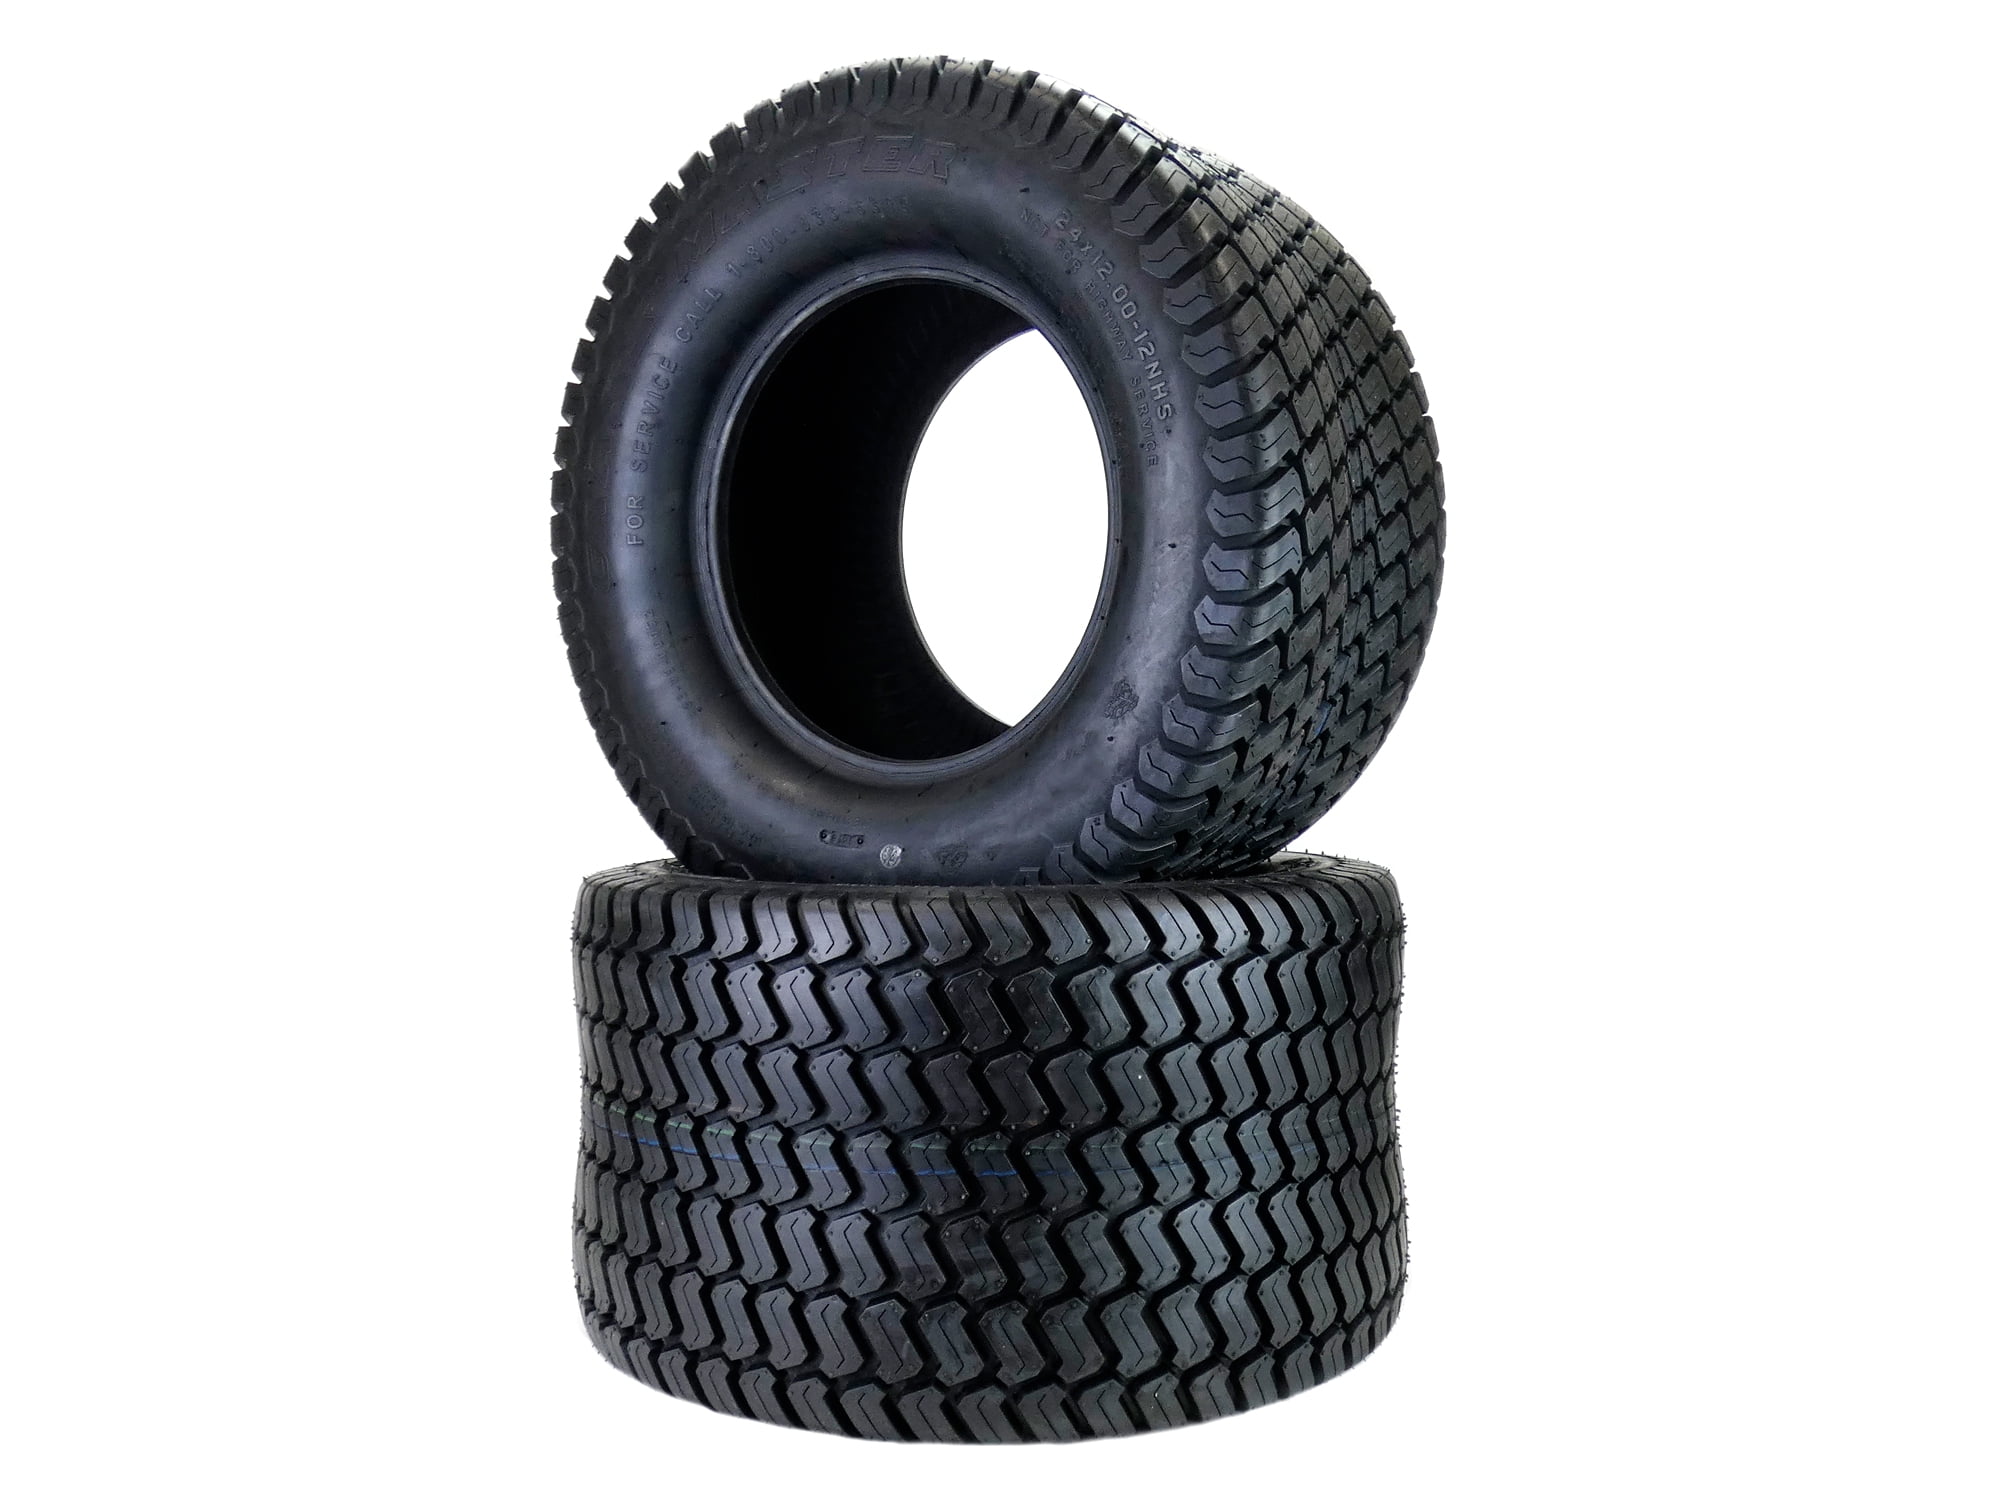 24x12.00-12  REAL Carlisle Brand quality Turf Master 4 ply garden tractor tire 